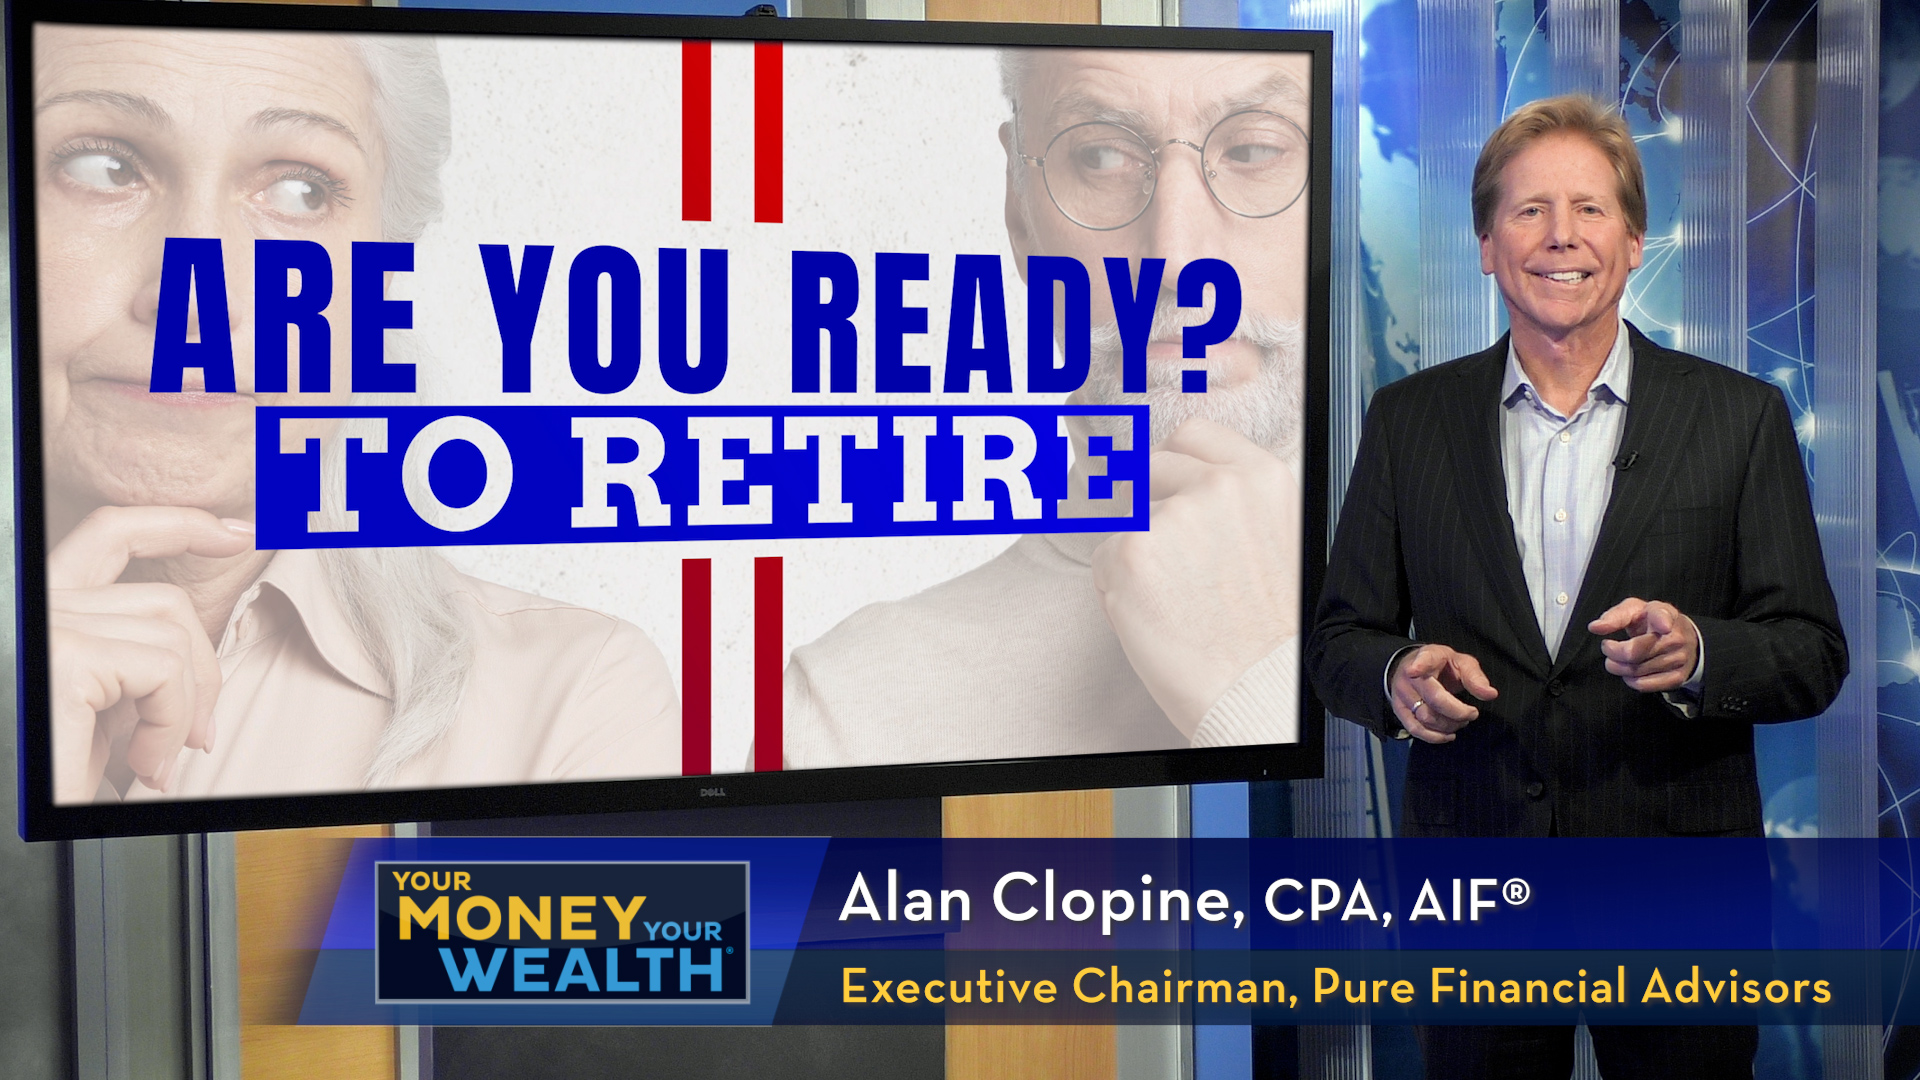 Are You Ready to Retire? Review Your Retirement Readiness | Your Money, Your Wealth TV S10 | E3